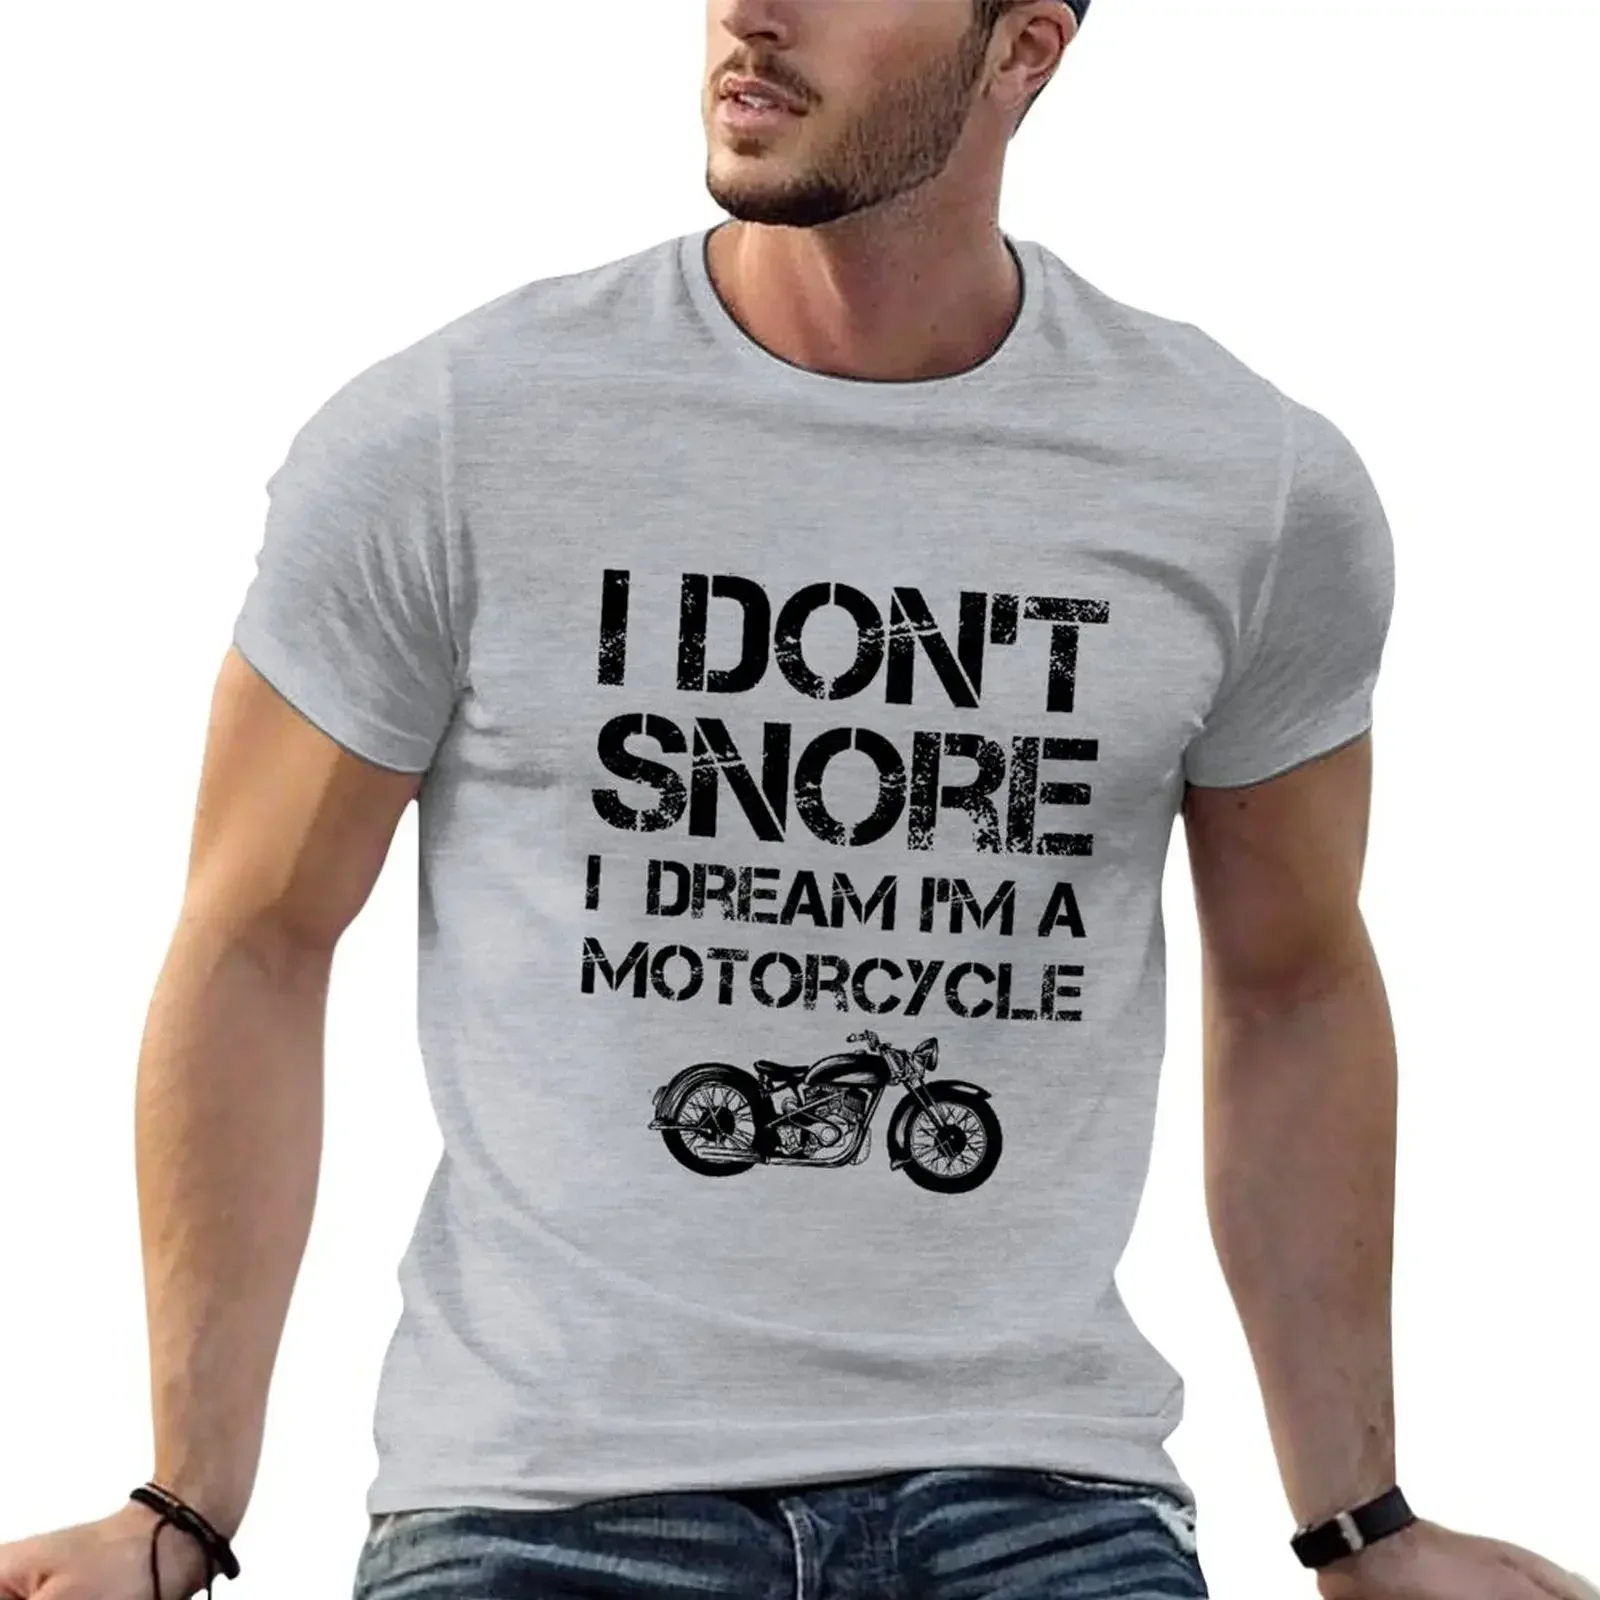 

I Don't Snore I Dream I'm a Motorcycle Shirt Funny Motorcycle Gift T-Shirt boys animal print sublime mens funny t shirts